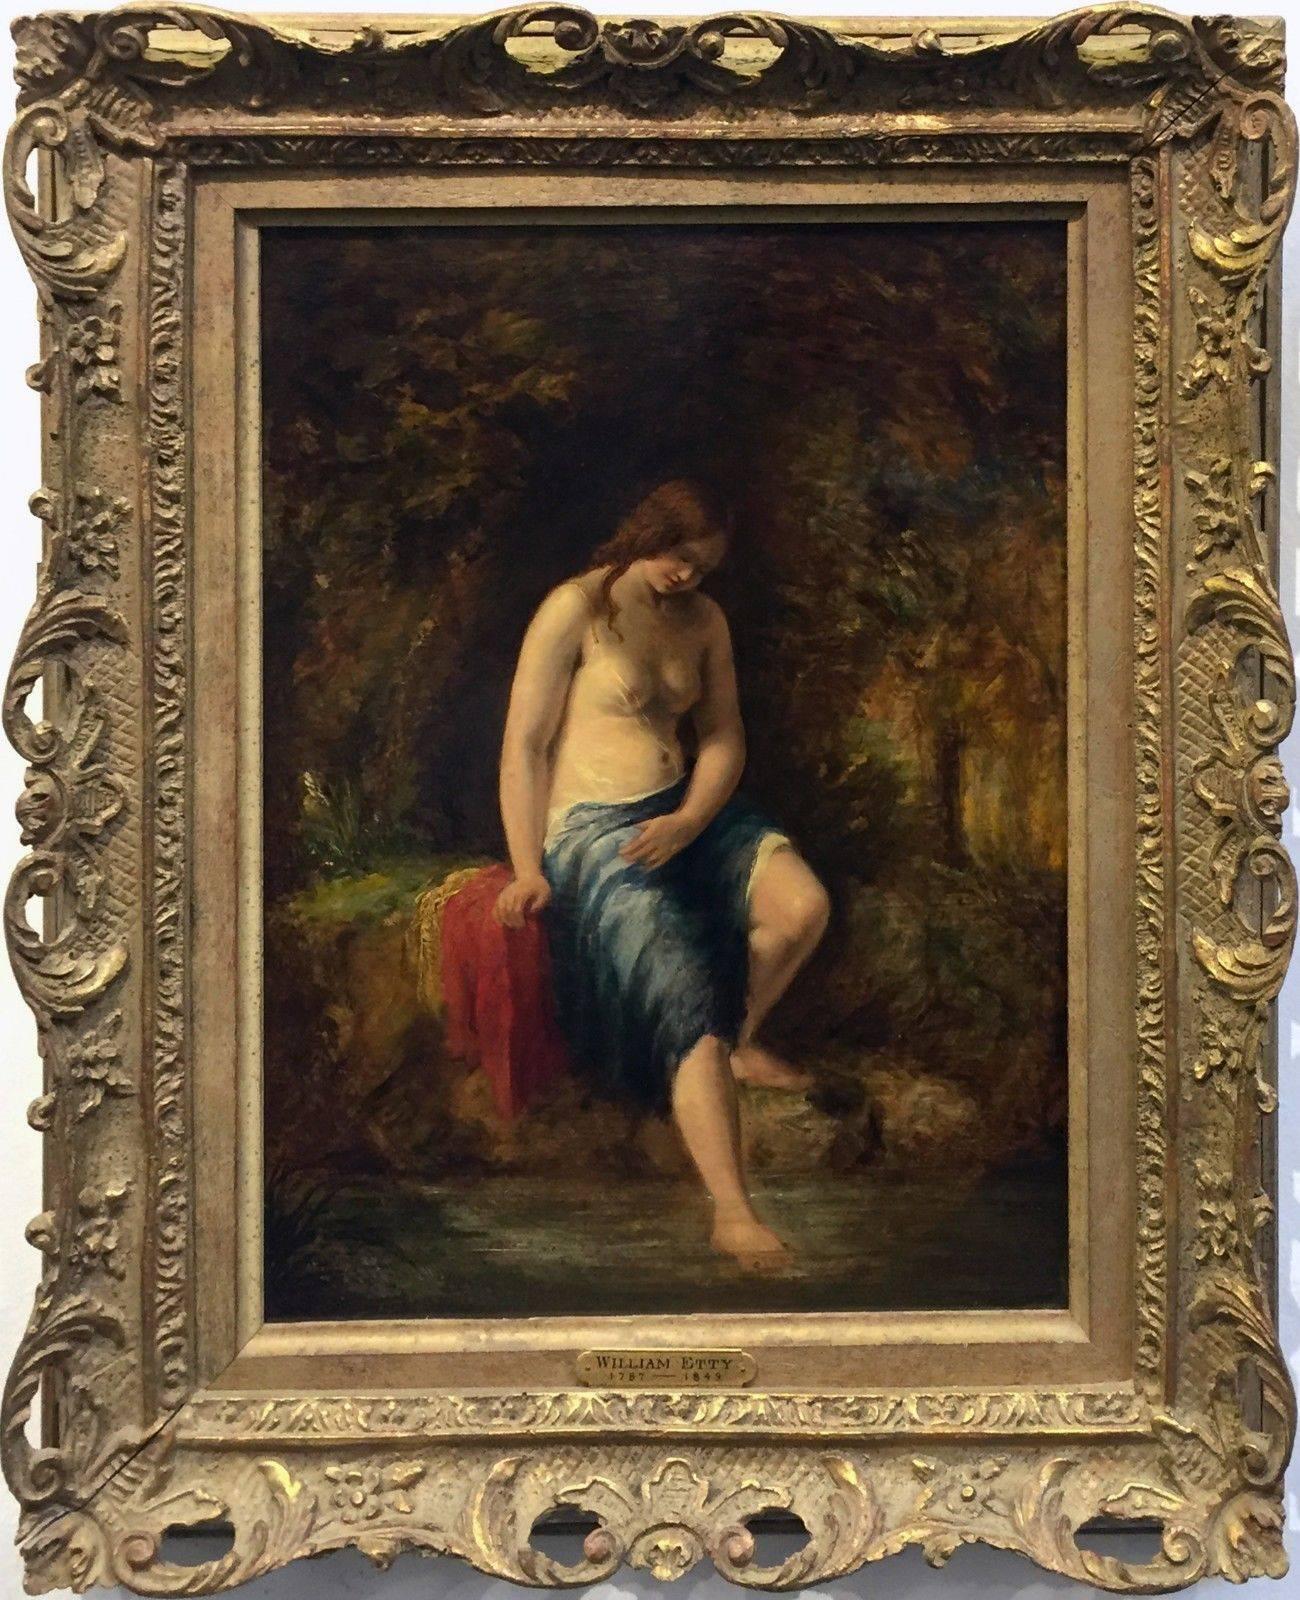 BATHER - Painting by William Etty R.A.